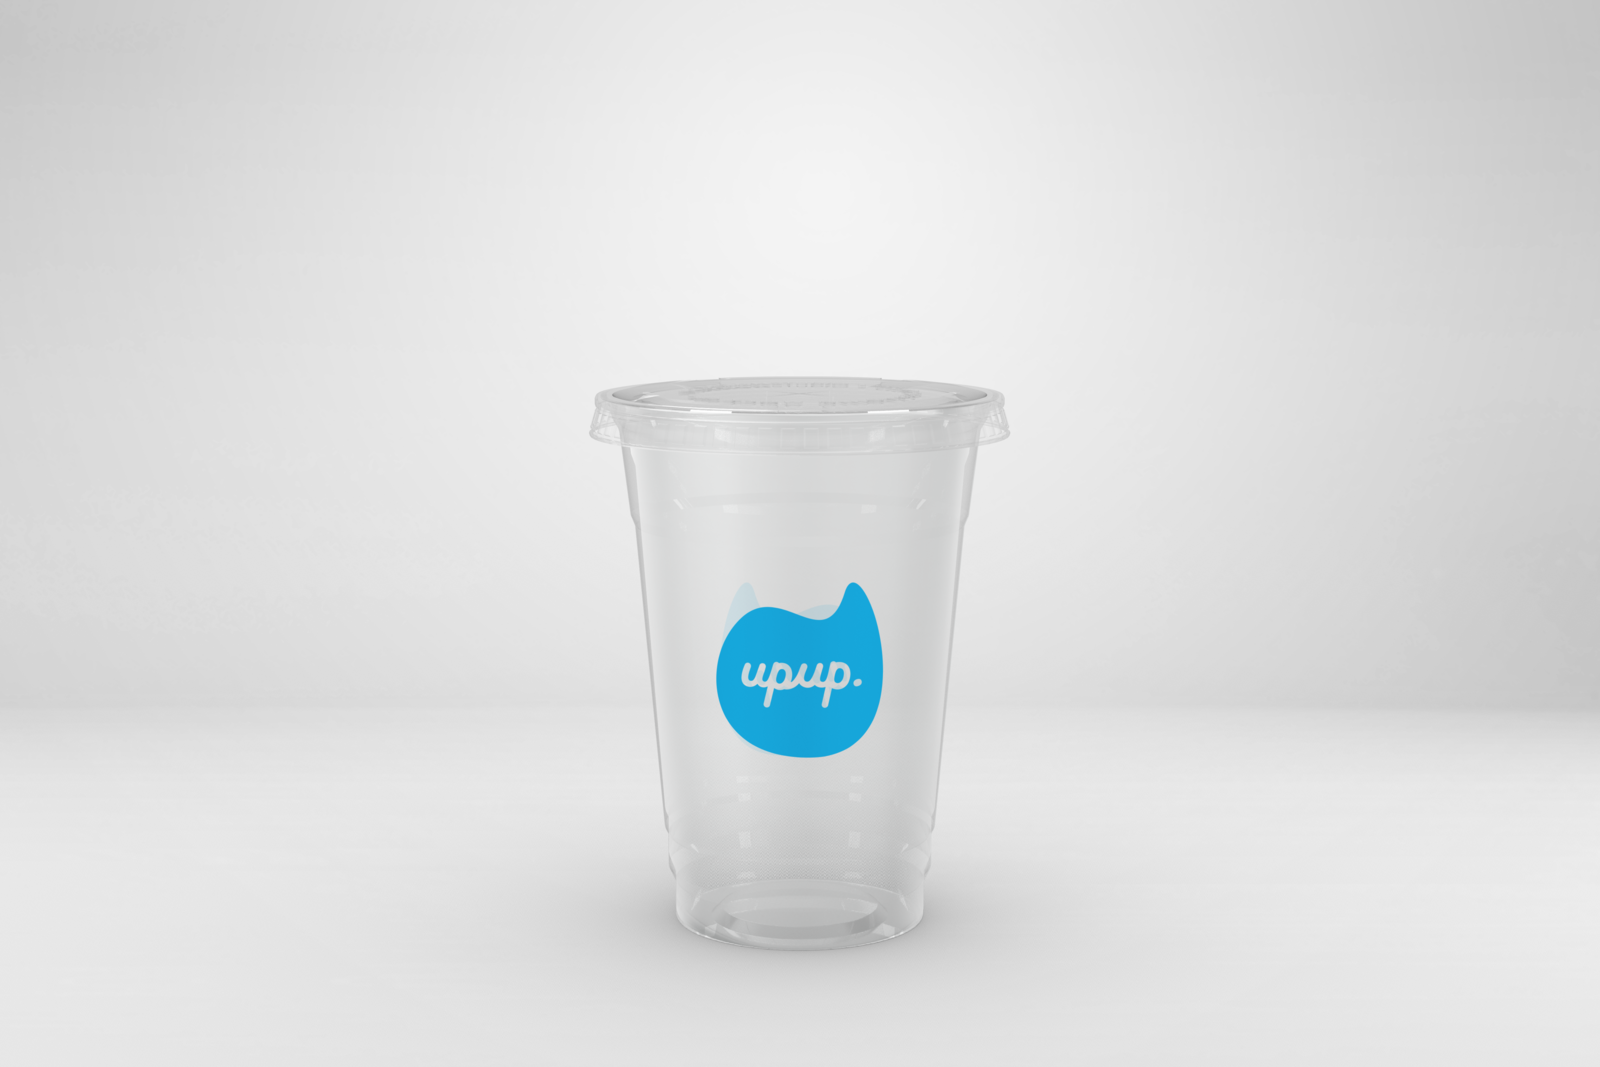 Download UPUP clear cup by Benjamin LeMar on Dribbble